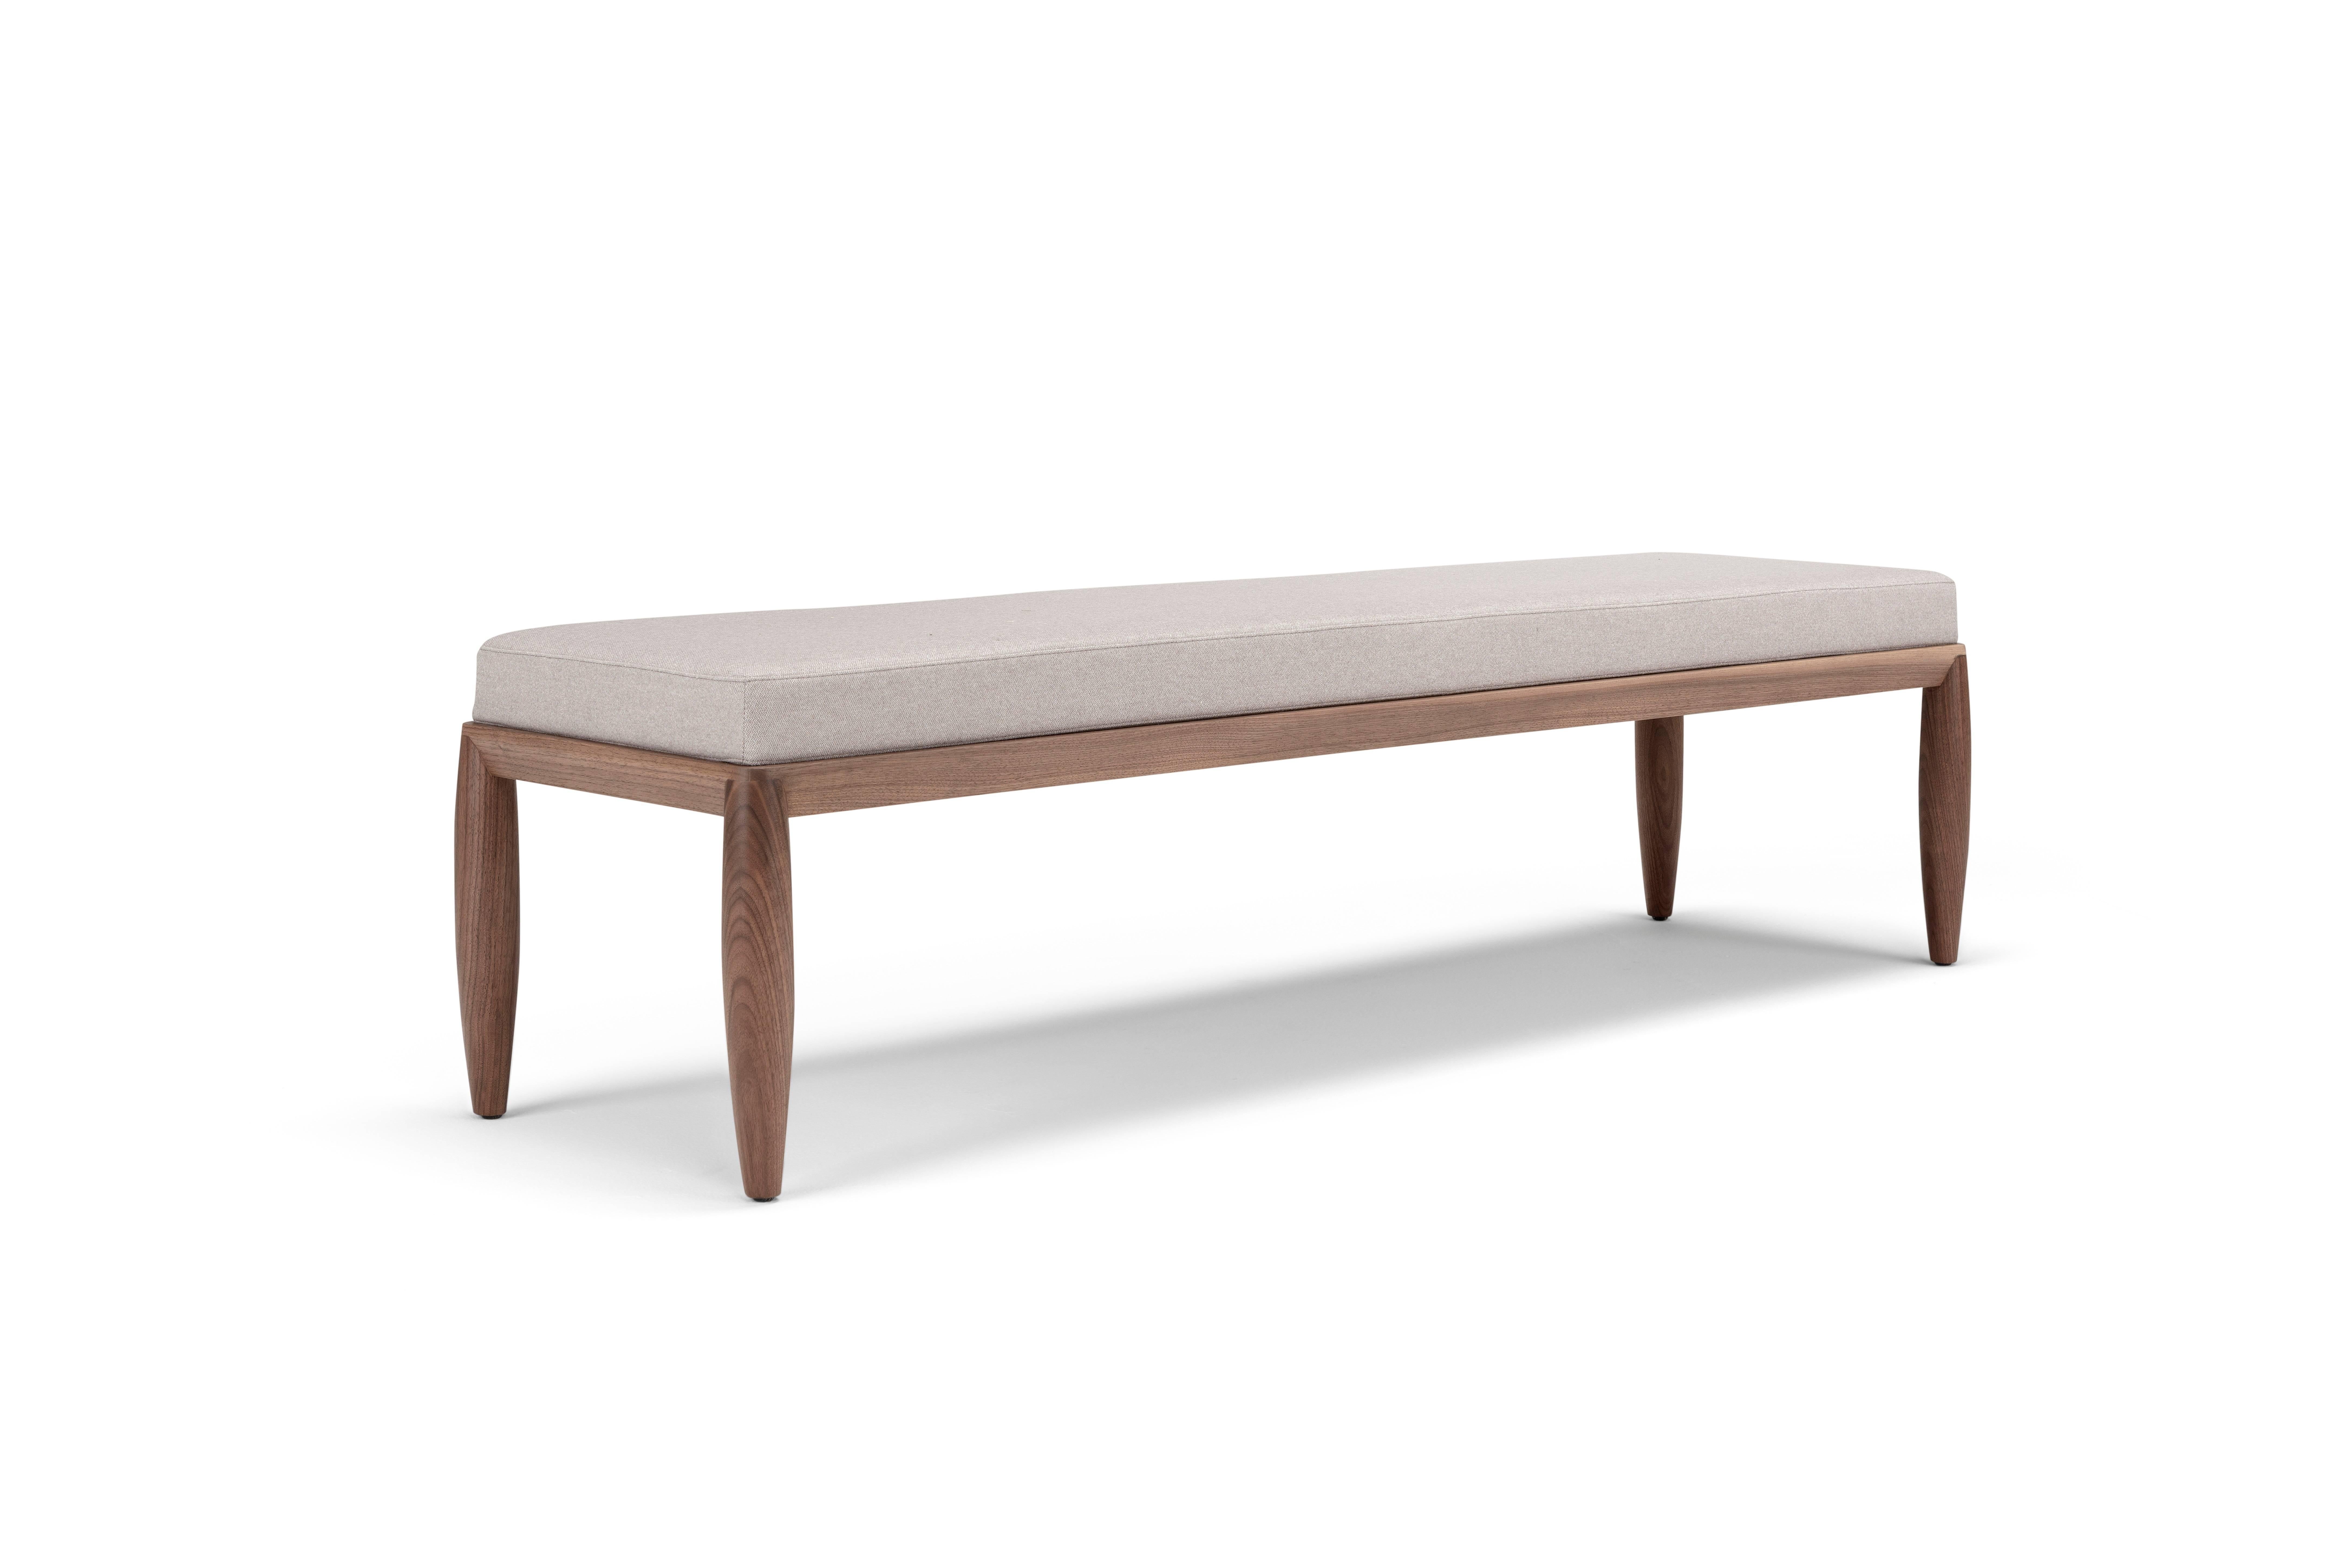 The Georgie collection branches mainly into two categories of seats and tables. The Bench with wooden base and padded seat, ideal to put at the foot of the bed to support clothes, clothes, linen, but also as a waiting bench in an entrance, a corner